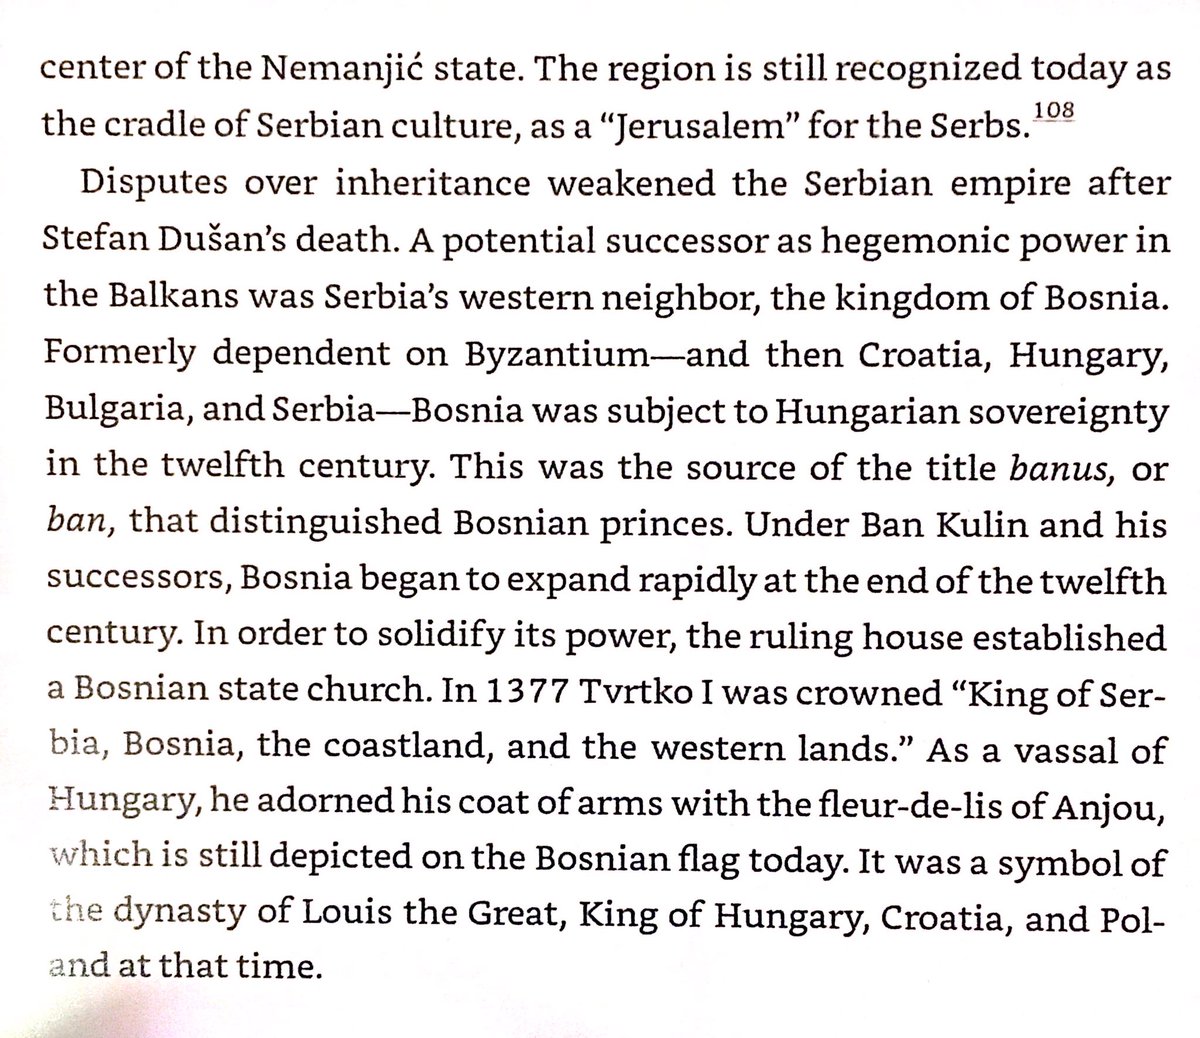 Byzantines decline & Slav growth led to Bulgarian, Bosnian, & Serb nobles abandoning the empire in 2nd half of 1100s. Nemanjic dynasty formed a Serb state in 1217, with Kosovo becoming its cultural & religious heart. They also created the Serbian Orthodox Church.